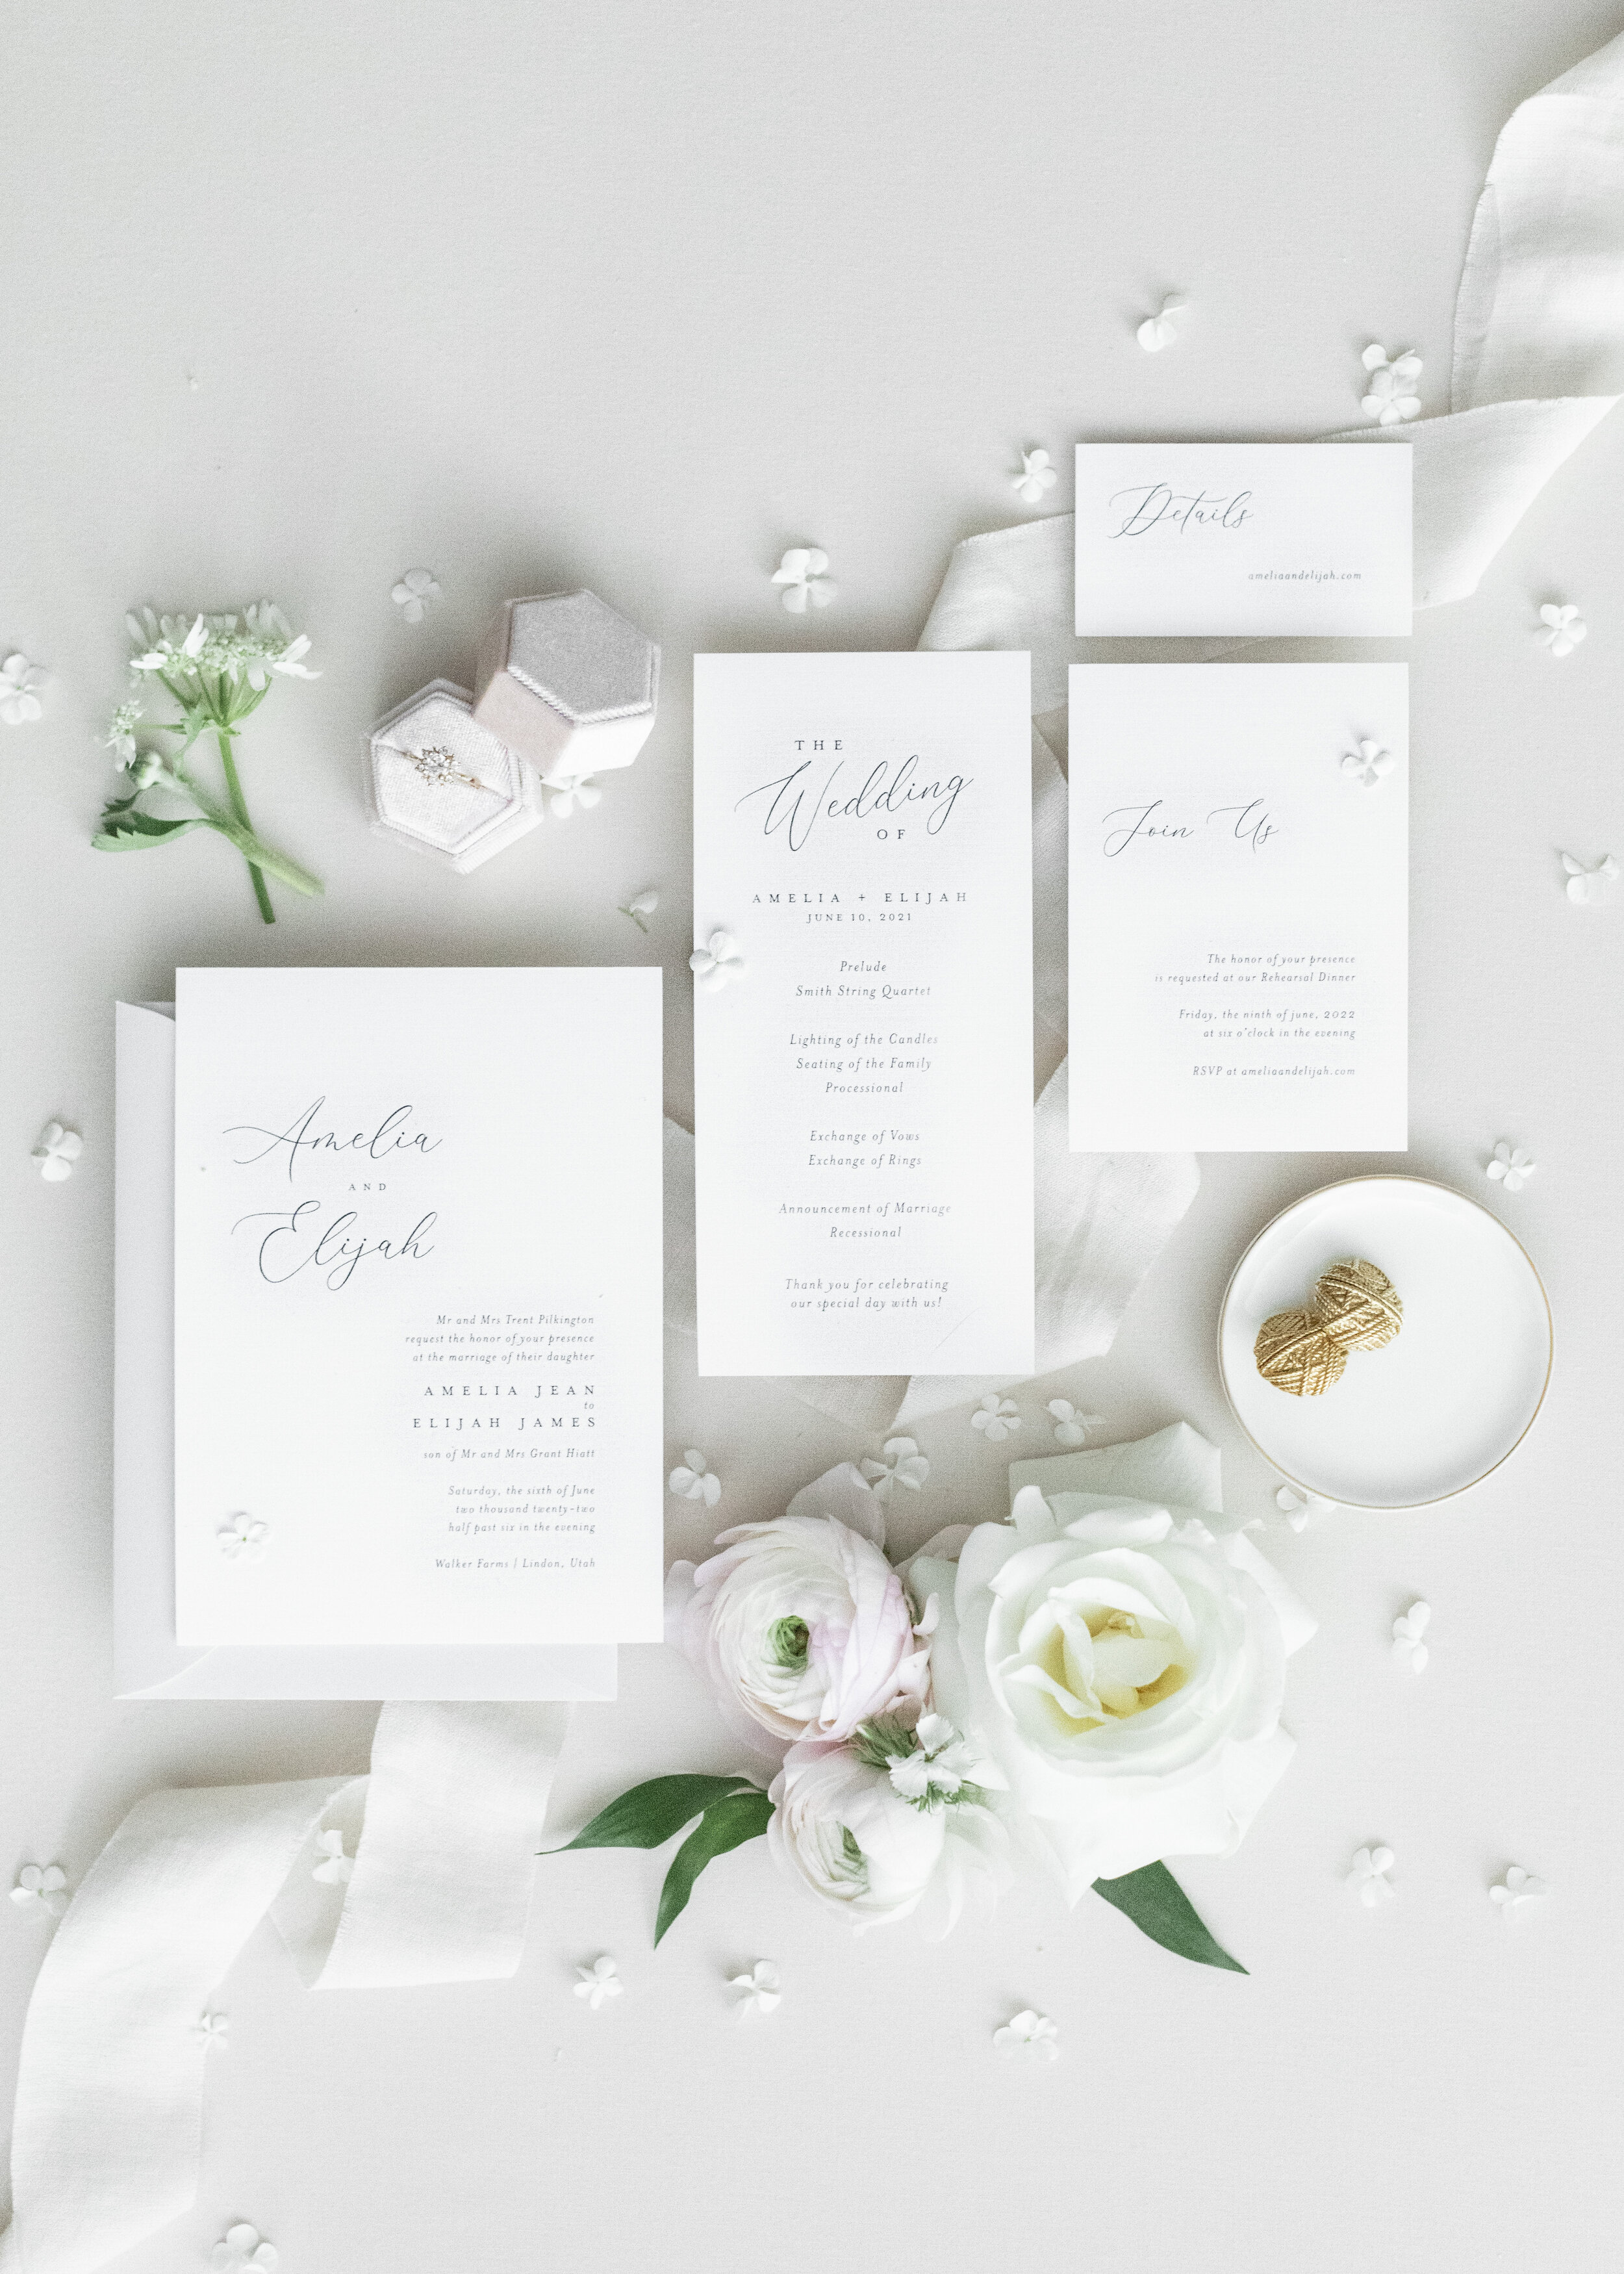  Simple classy flat-lay photo of wedding invitation and insert cards captured by Clarity Lane Photography during a wedding day workshop in Logan, Utah. photographers teaching photographers professional photographers #claritylanephotography #clarityla